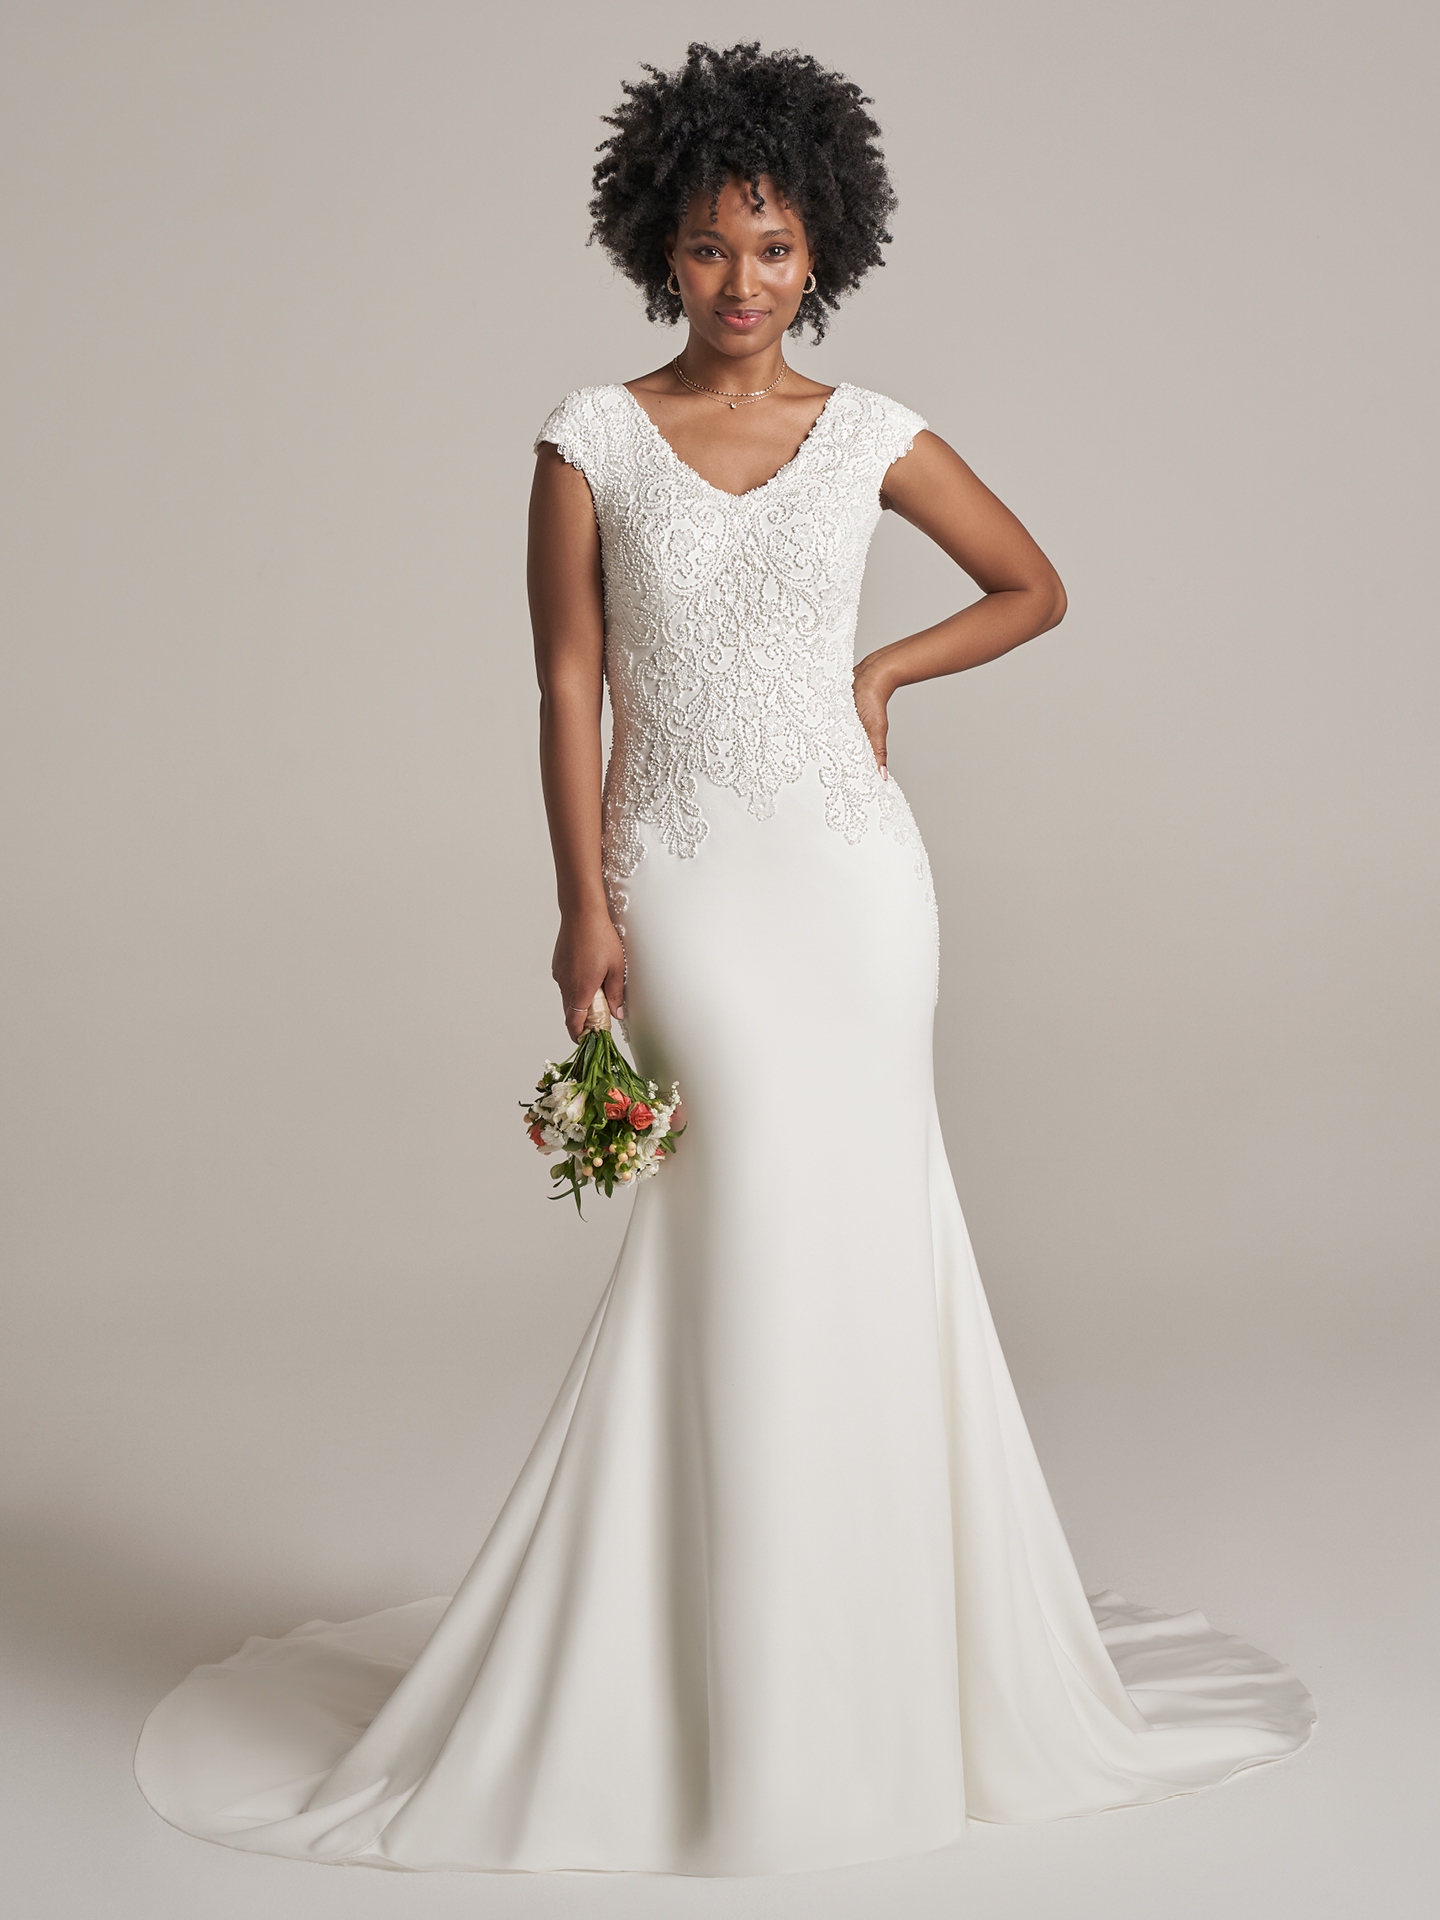 Beaded Fit And Flare Wedding Dress With Off The Shoulder Long Sleeves |  Kleinfeld Bridal